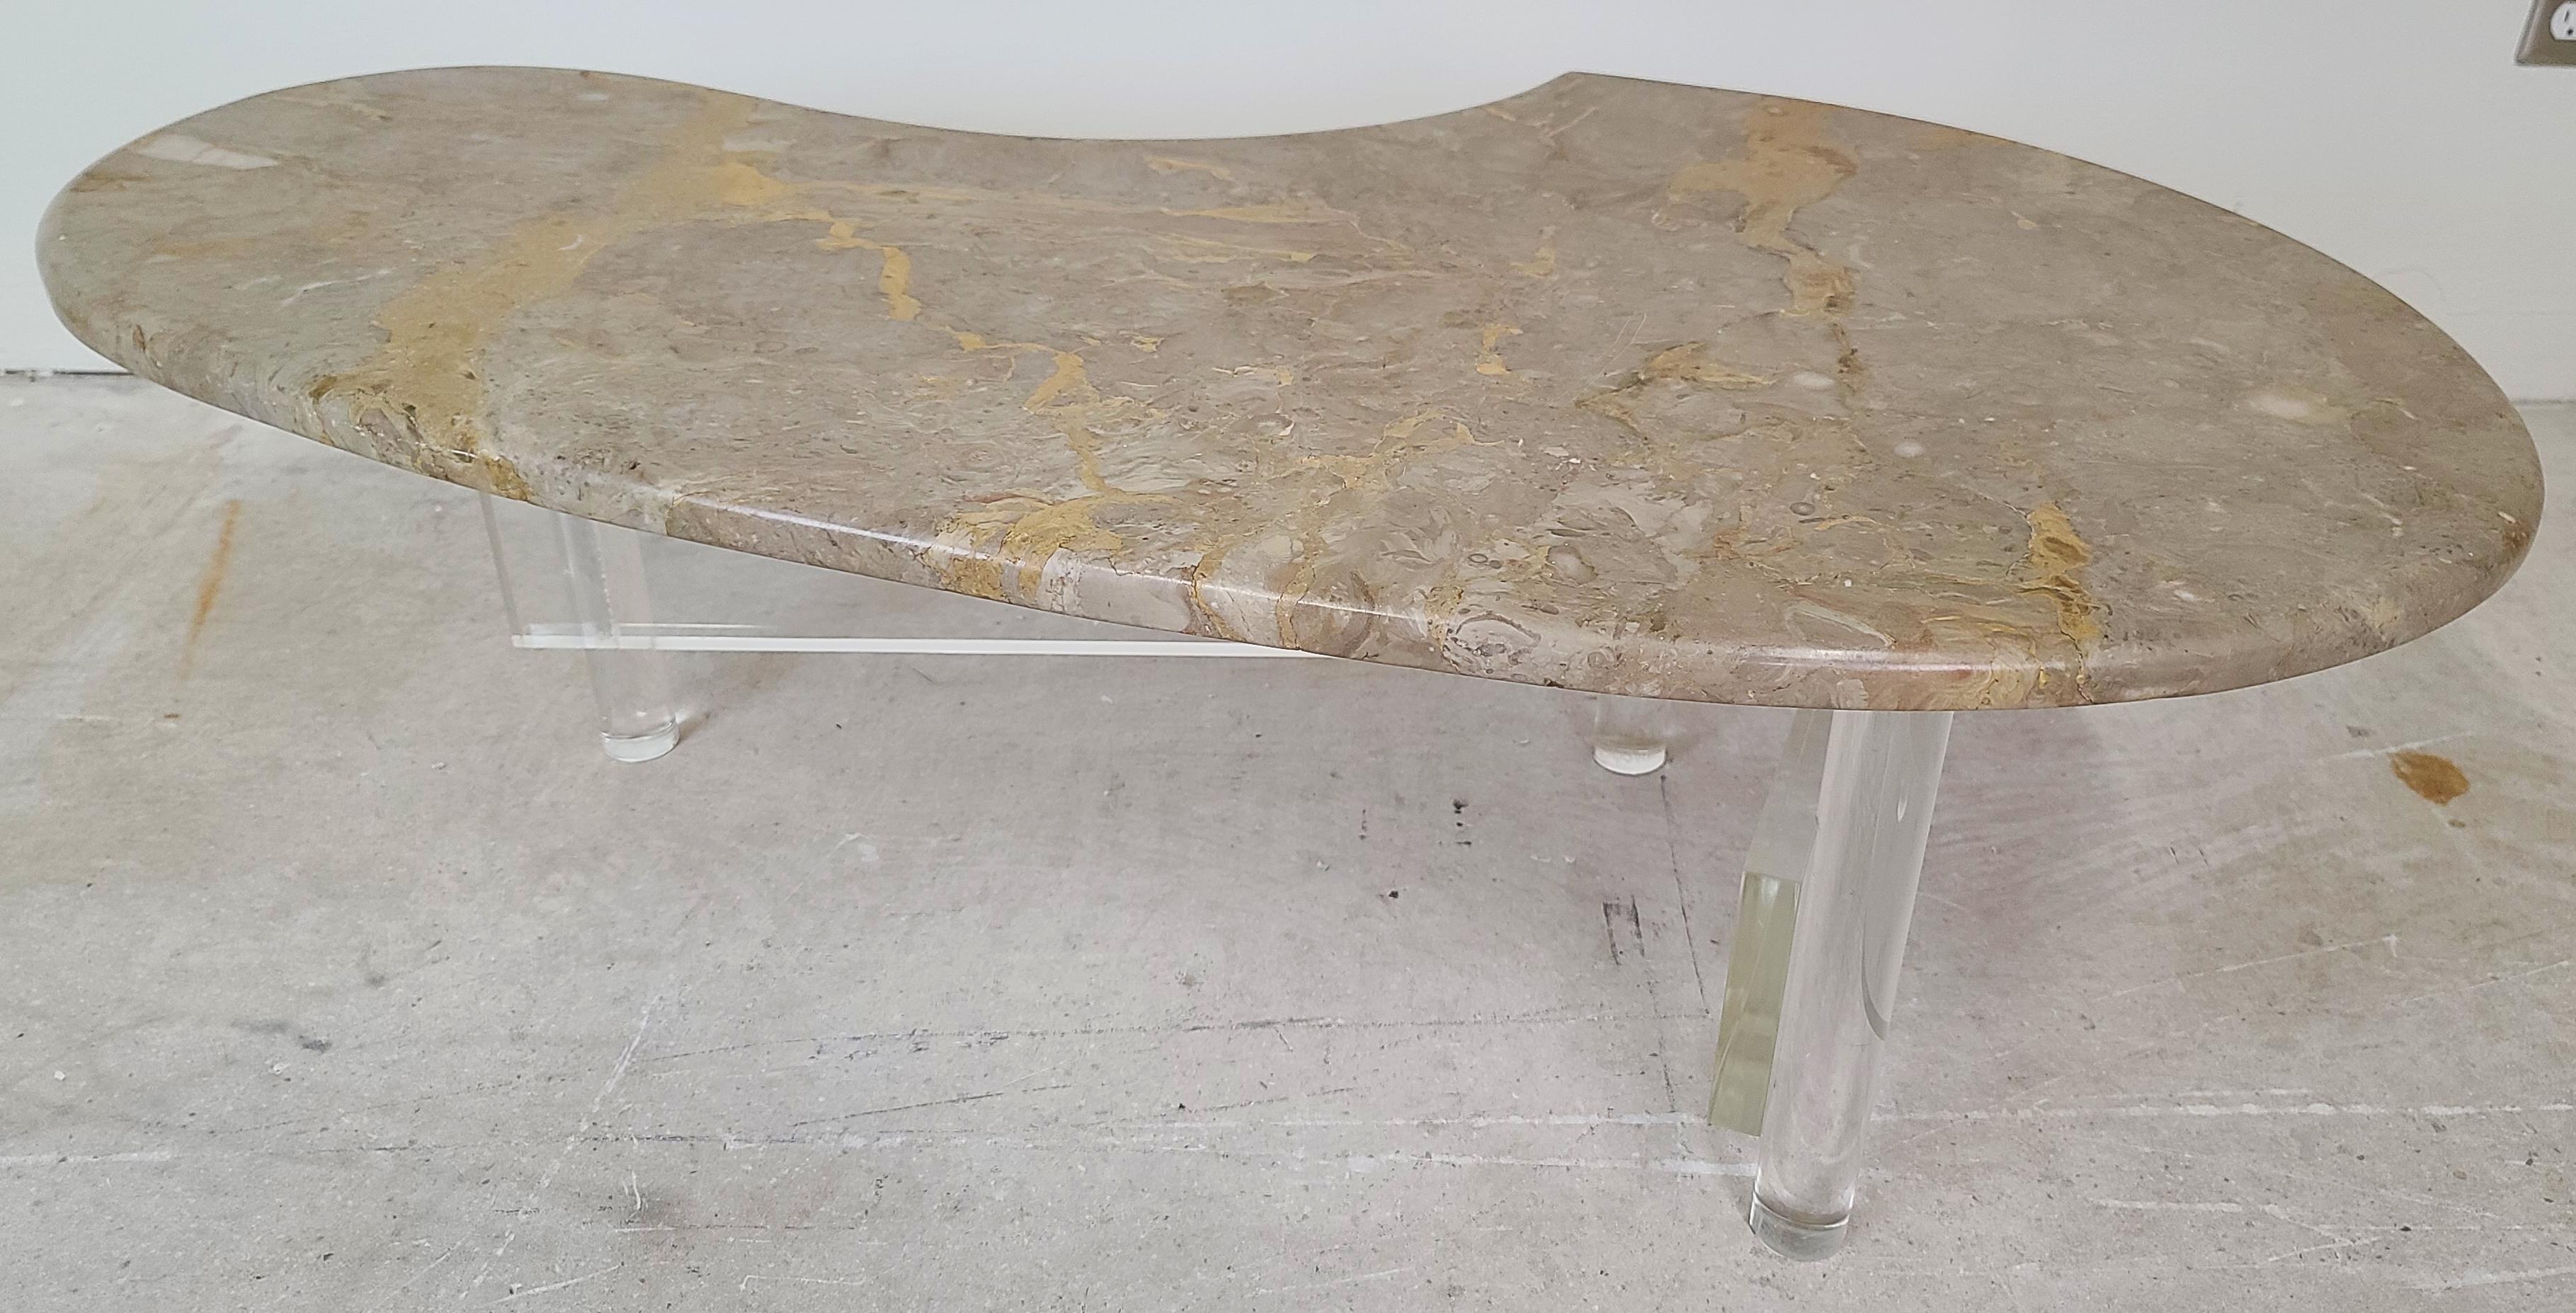 Offering one of our recent Palm Beach Estate fine furniture acquisitions of A
1960's Vintage Mid-Century Modern Boomerang Italian Marble & Lucite Coffee Cocktail Table 
A fantastic piece of old-world Marble on a custom-made to fit Lucite